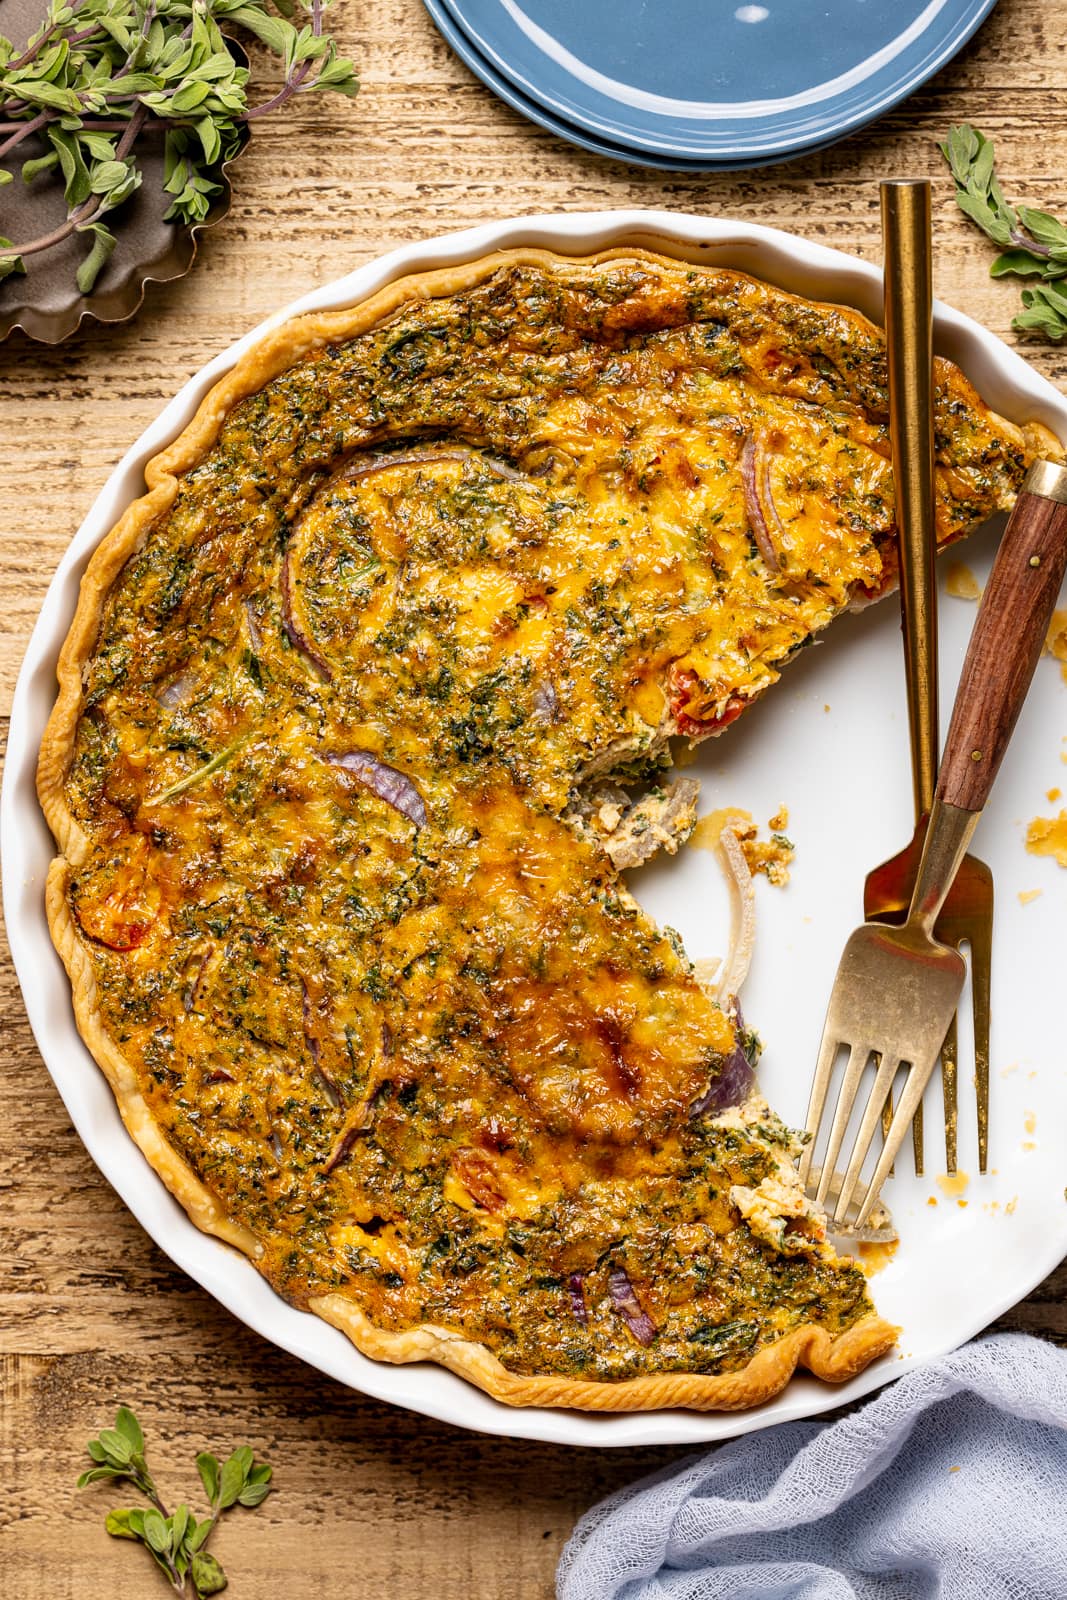 Baked quiche with slices removed on a brown wood table with two forks and a blue napkin and herbs + seasonings. 